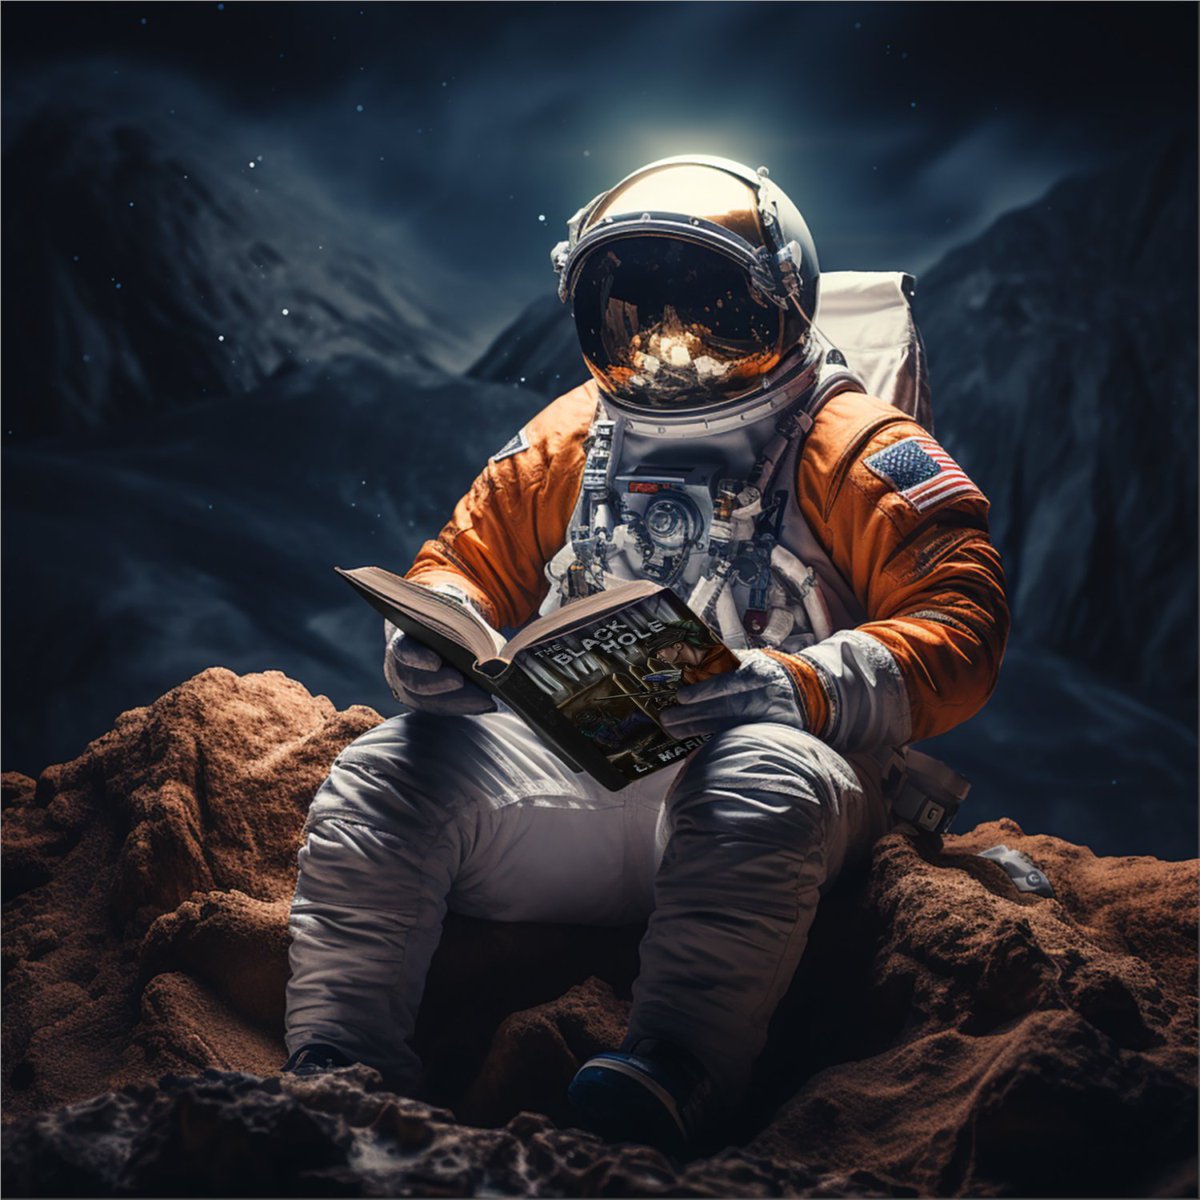 mybook.to/theblackhole
🌠 Experience the intensity of #TheBlackHole by L. Marie Wood! 💢 Paintball takes a dark turn, testing friendships and survival instincts. 🤯 Will they escape the deadly maze? #bookrecomendation #thrillerbooks